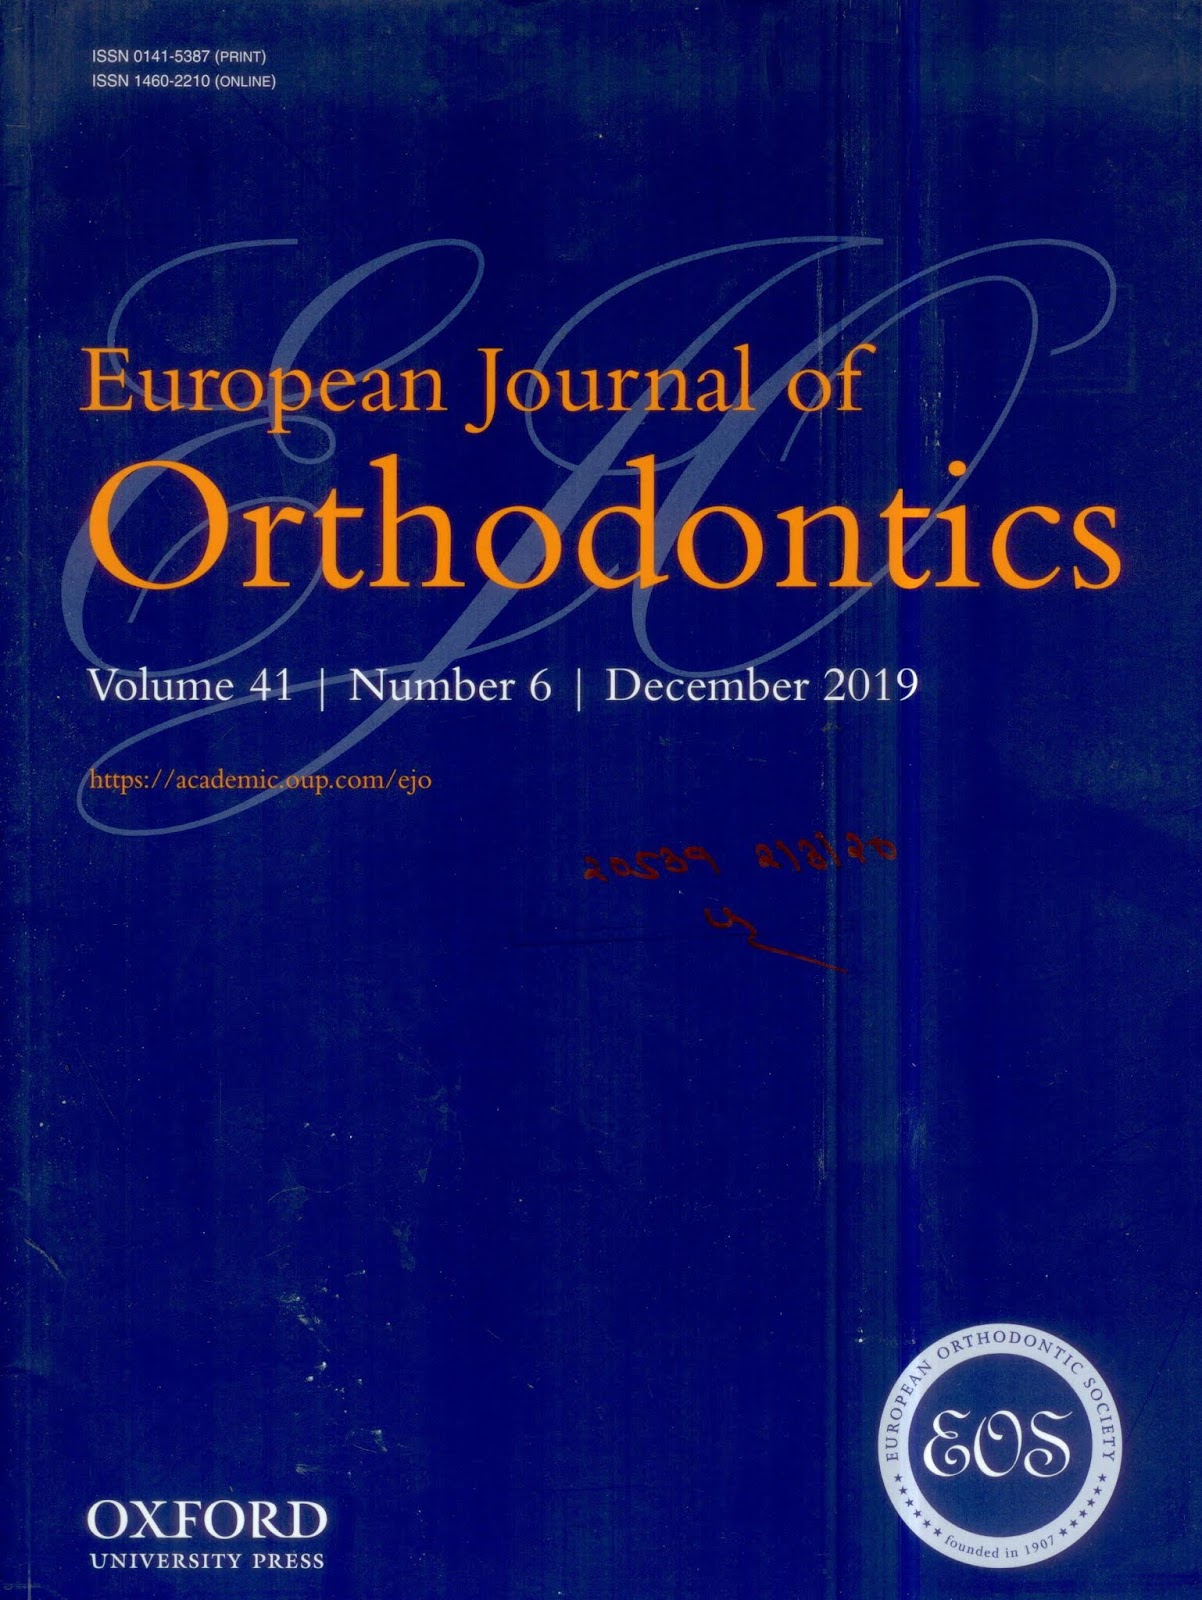 https://academic.oup.com/ejo/issue/41/6